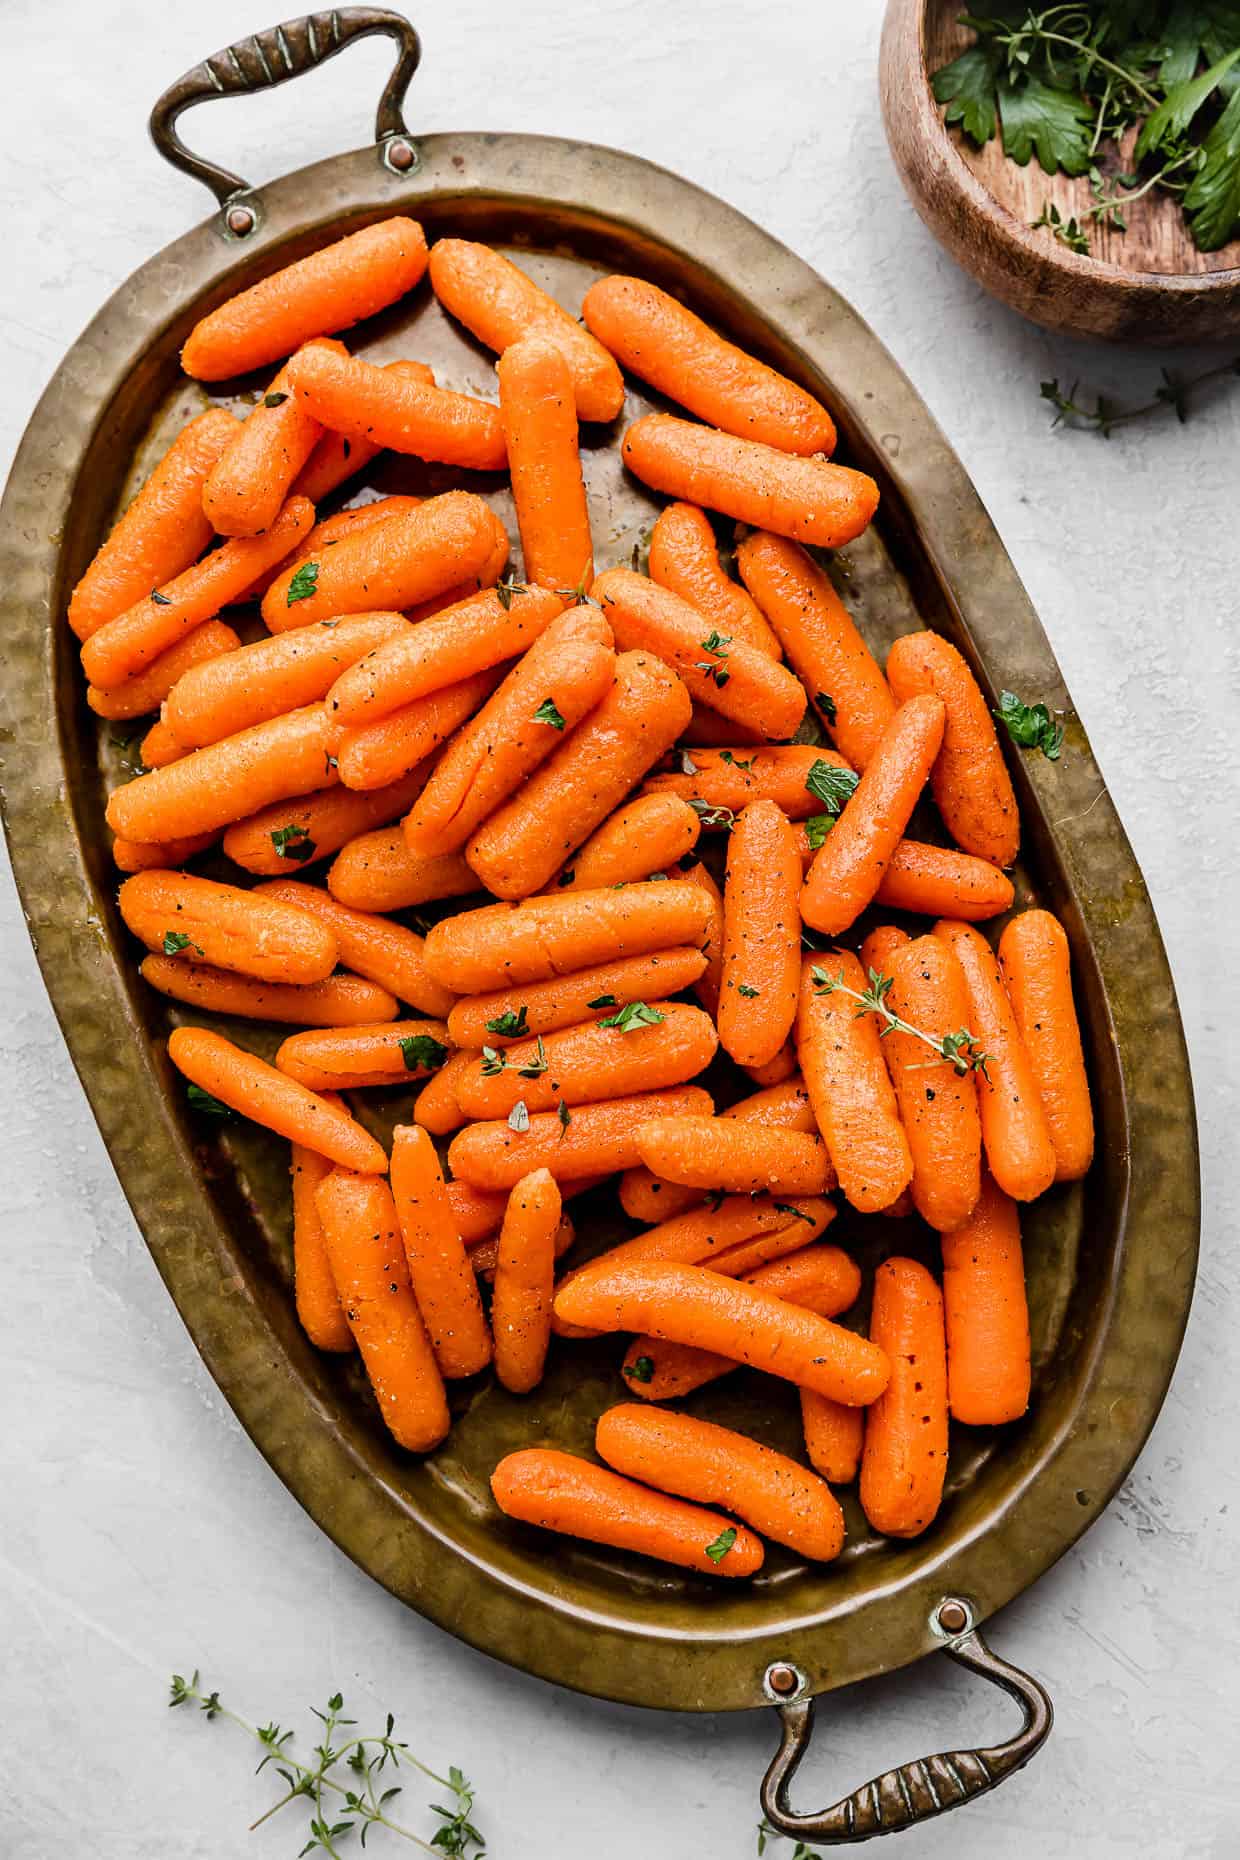 Roasted Baby Carrots on a bronze oval plate on a white background.